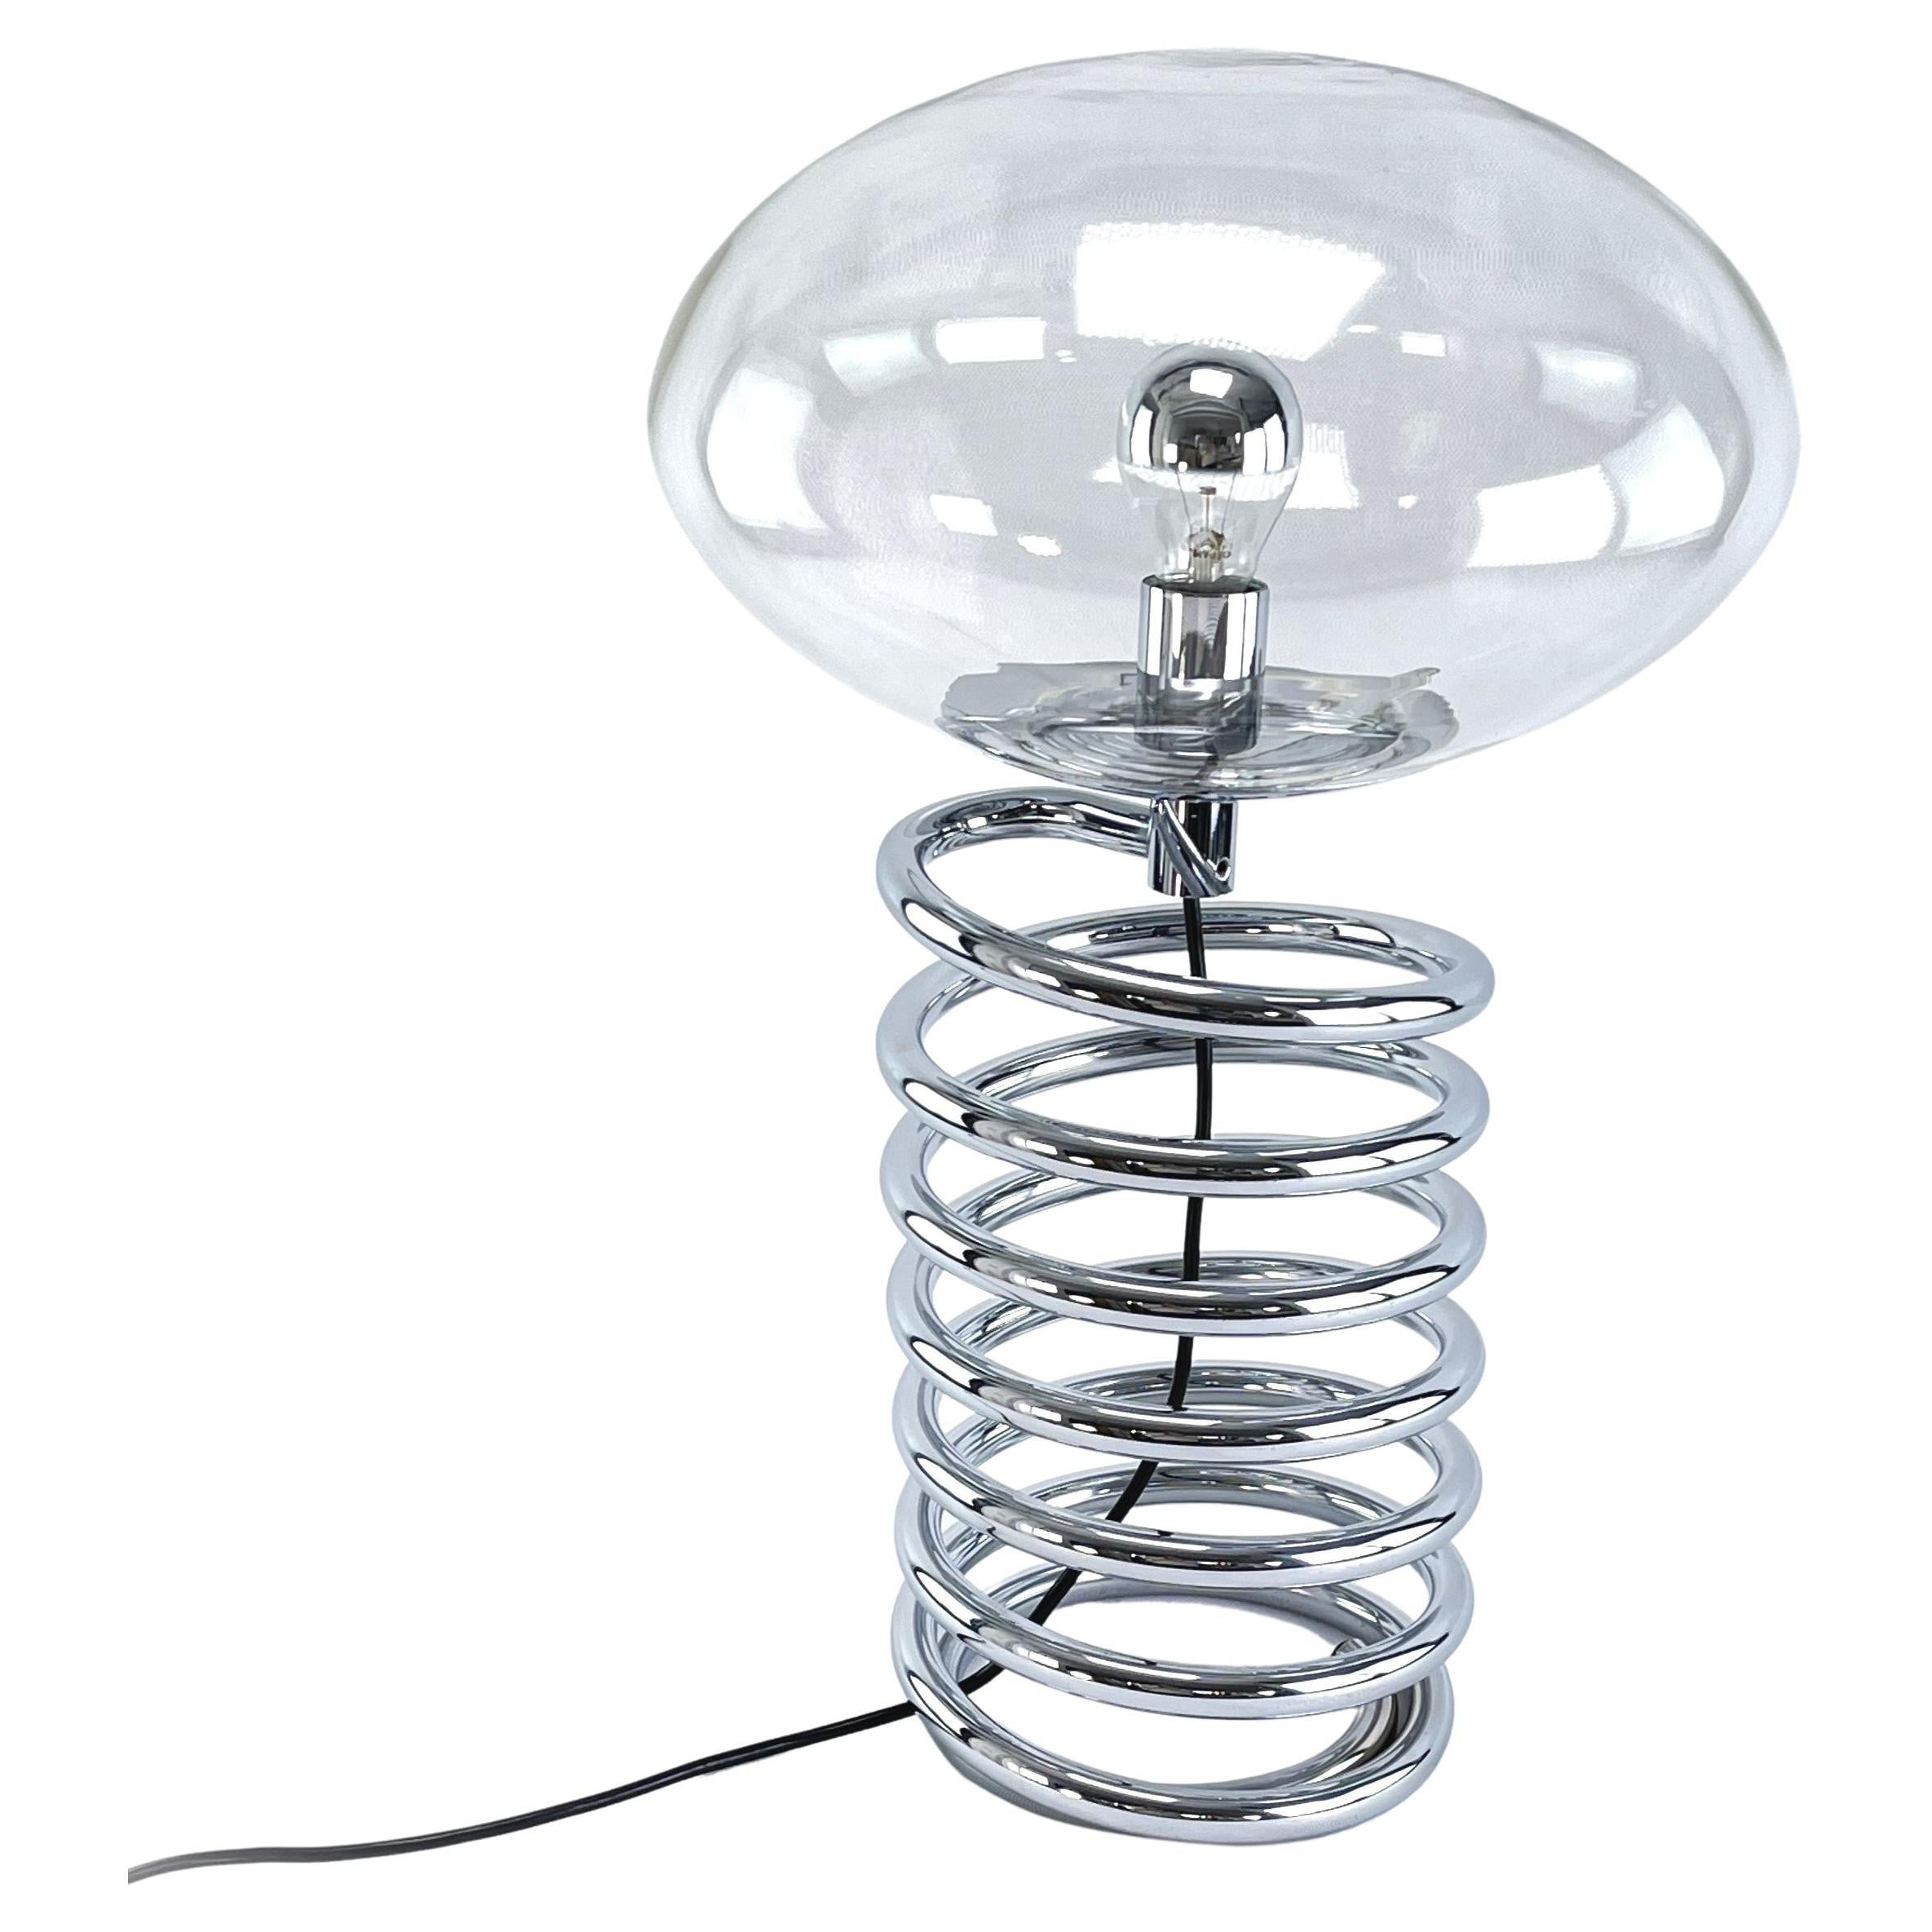 Vintage Floor and Table Lamp "Spirale" by Ingo Maurer for Staff, 1970s